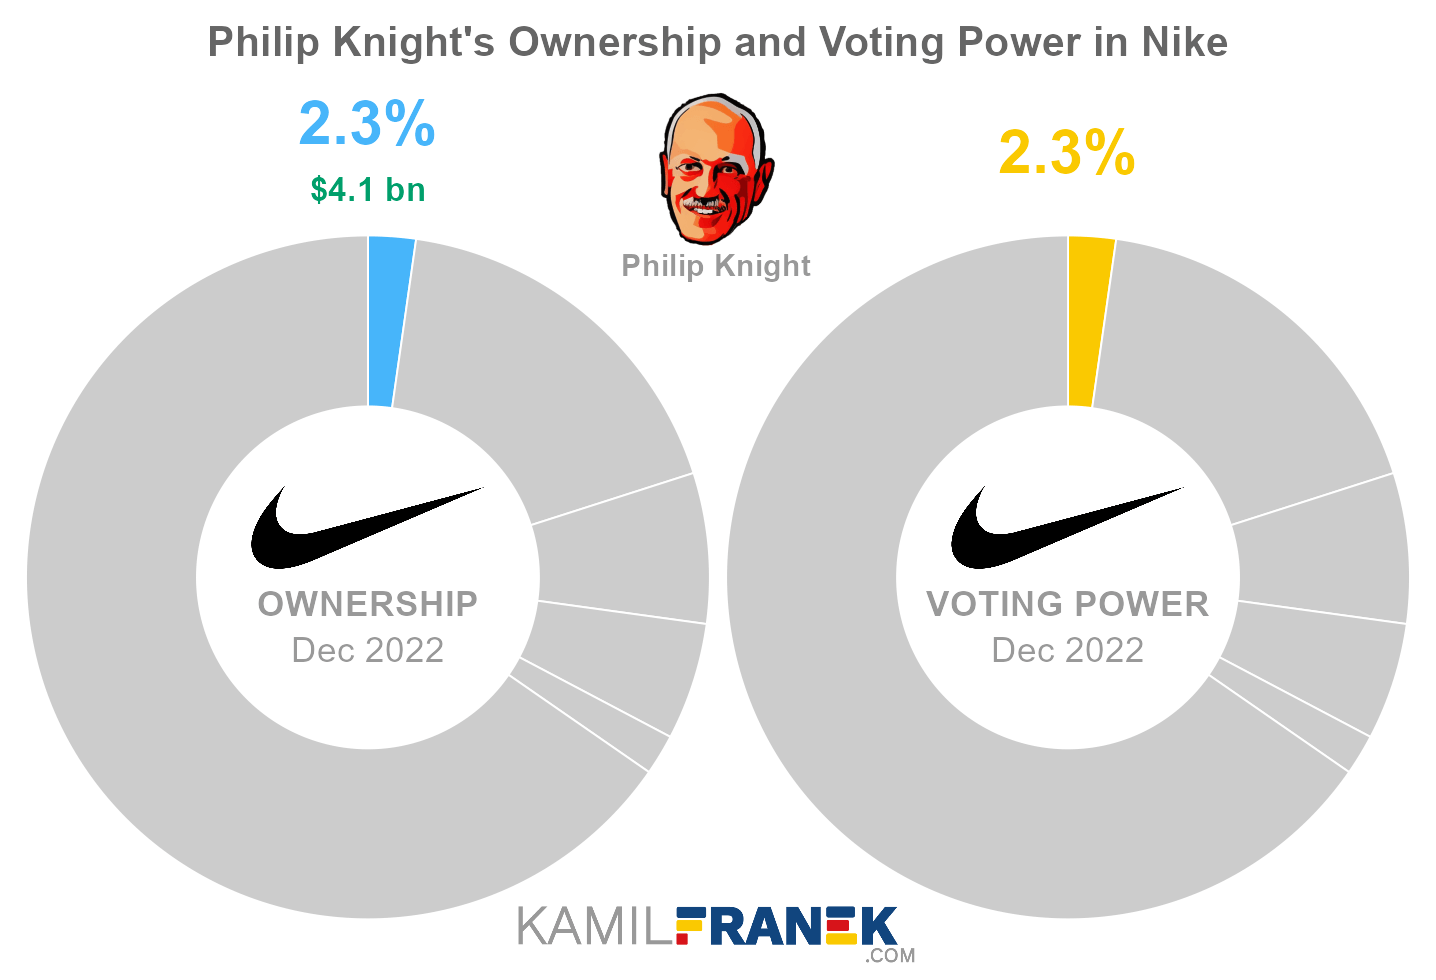 Philip Knight's share ownership and voting power in Nike (chart)